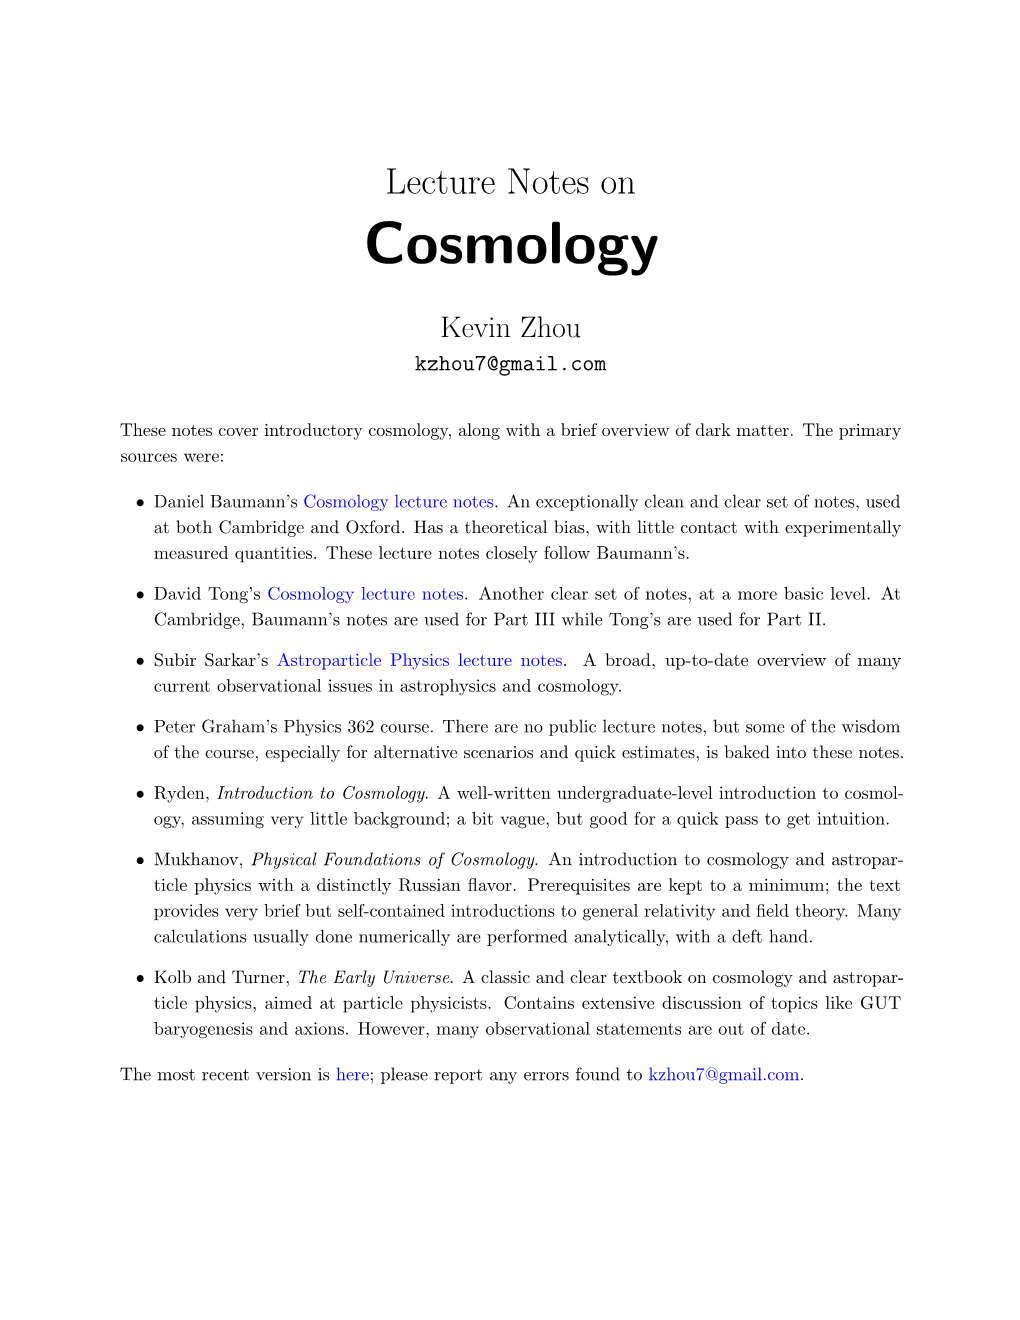 Lecture Notes on Cosmology